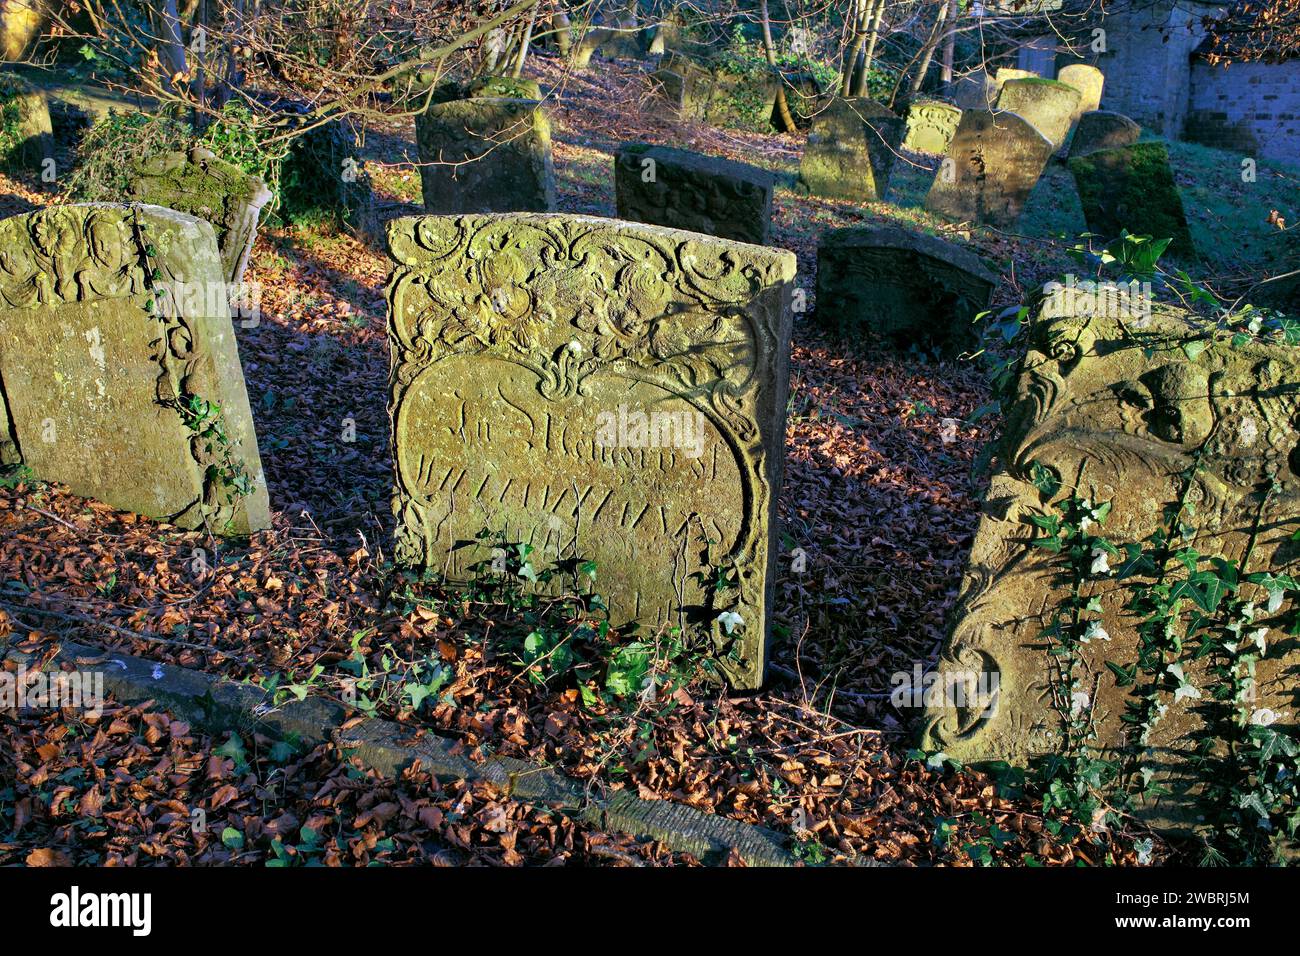 Late afternoon winter sunshine highlights ornate details on old weathered headstones in a church graveyard. Stock Photo